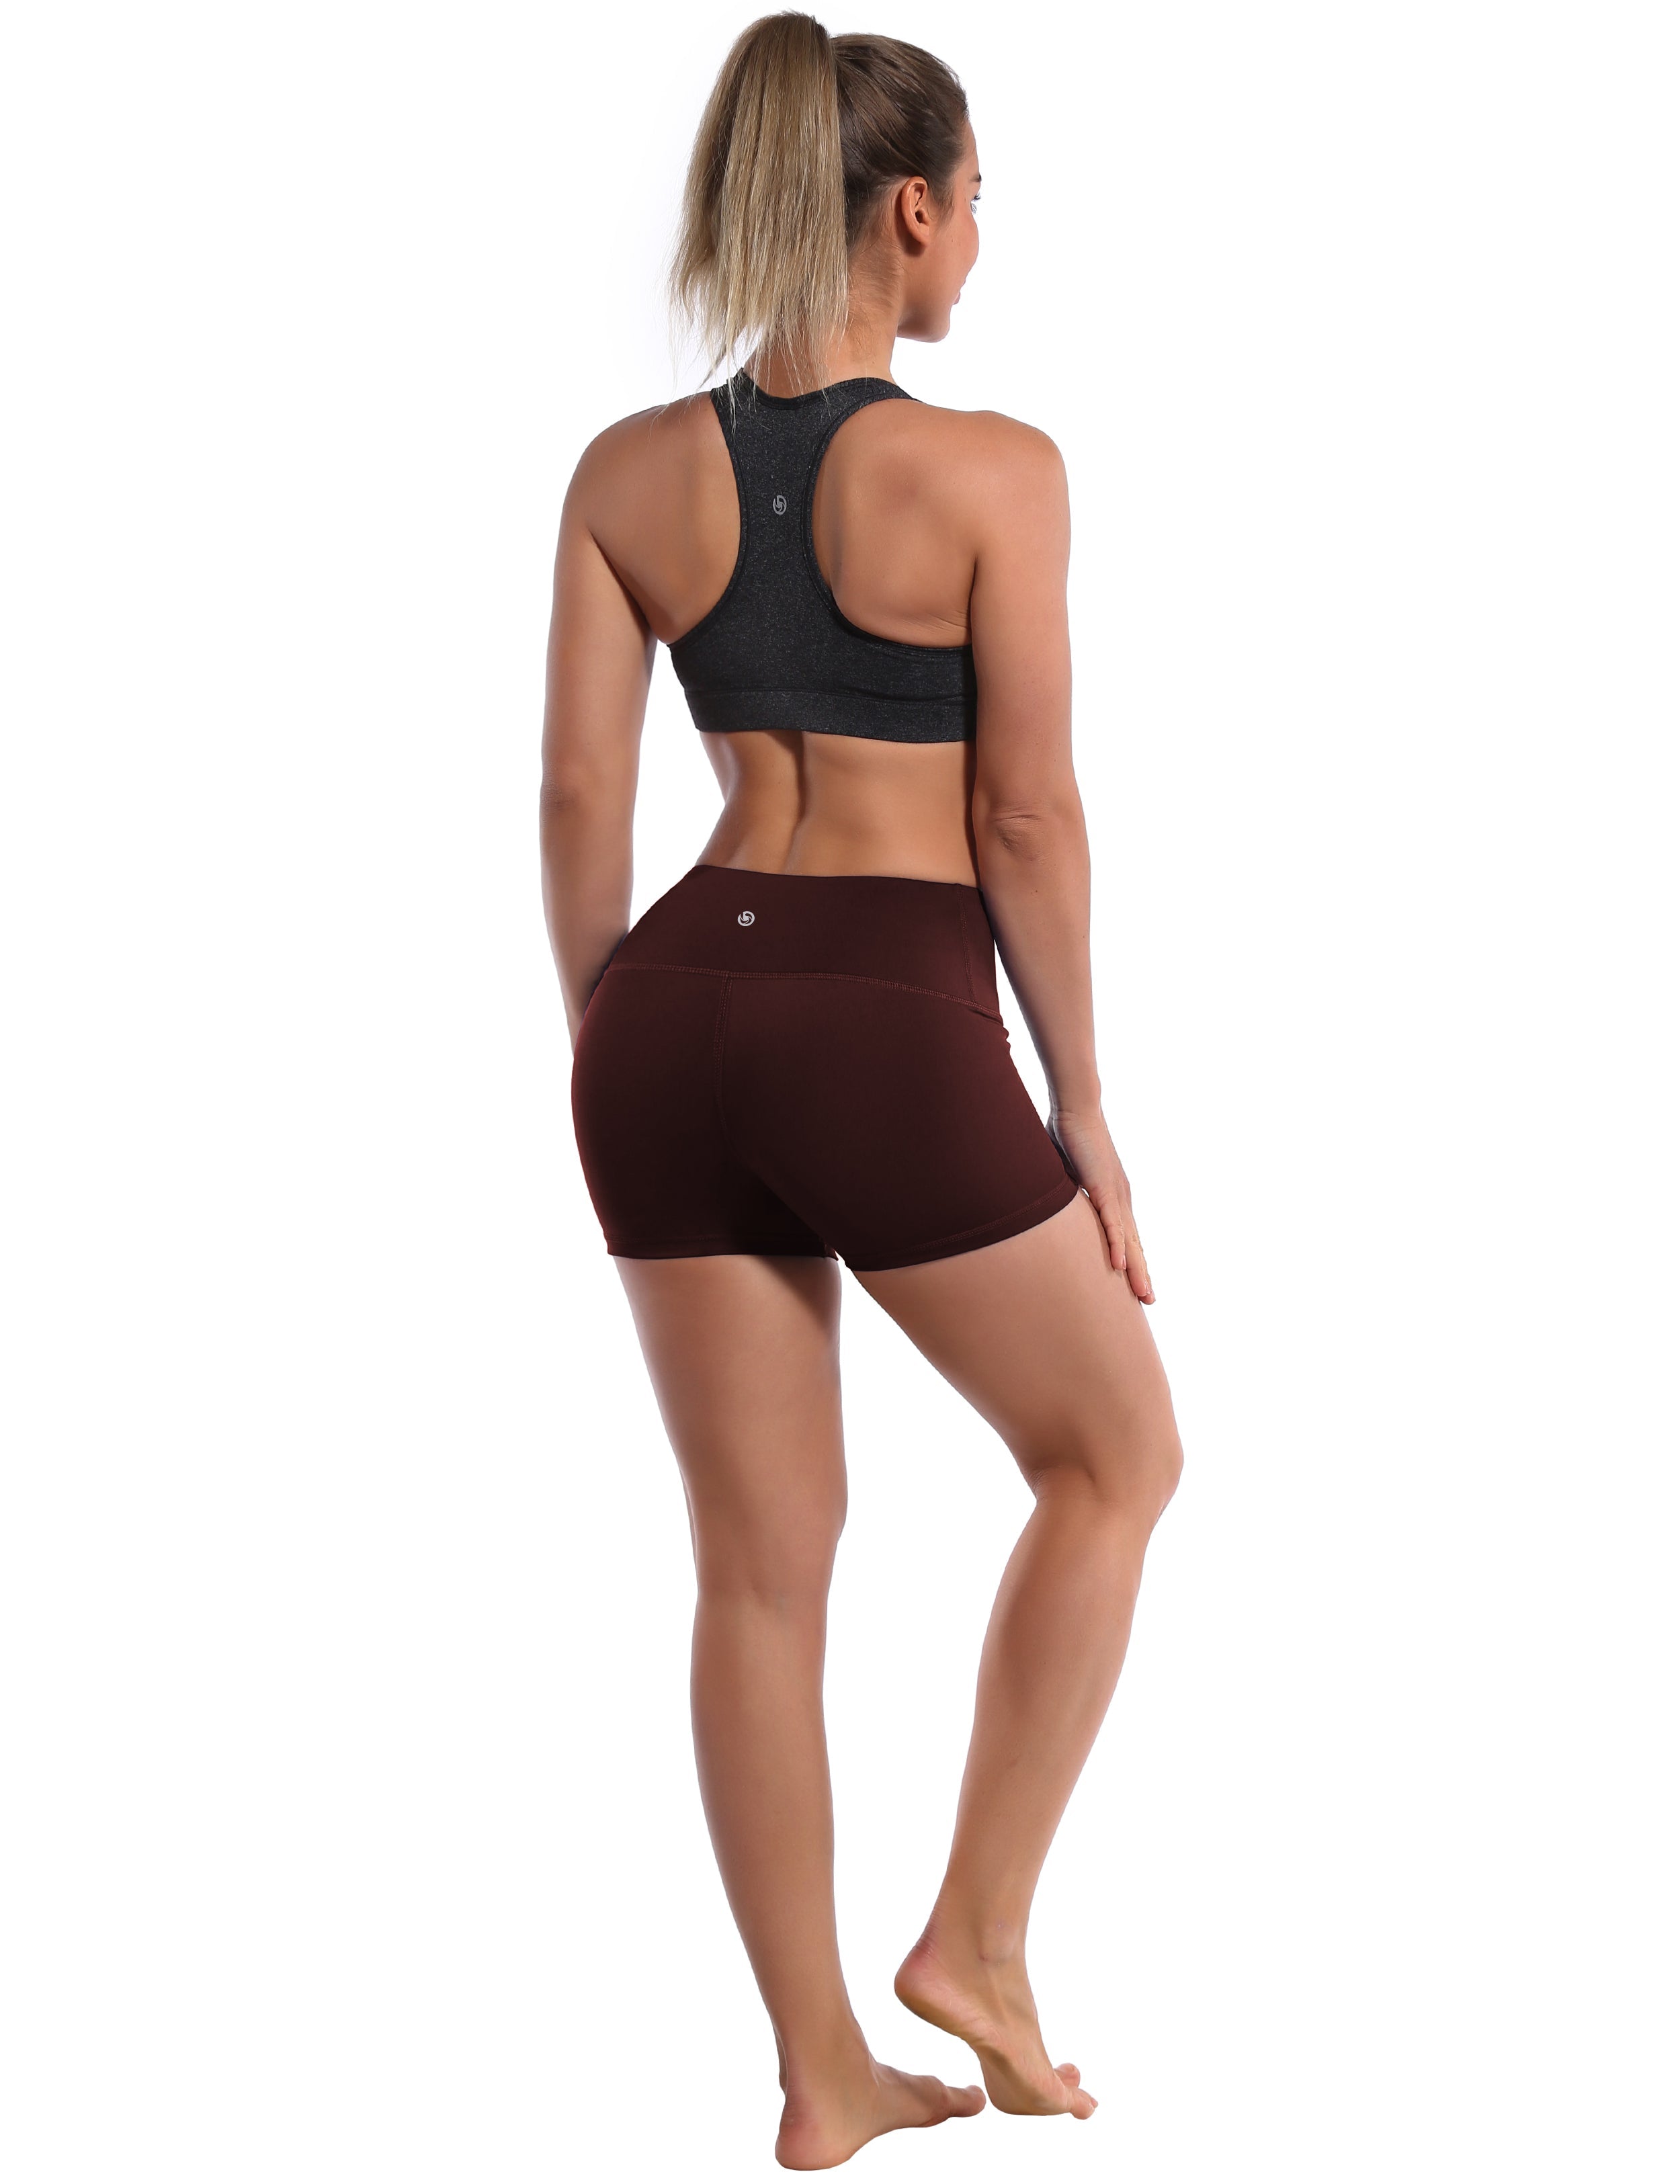 2.5" Running Shorts mahoganymaroon Softest-ever fabric High elasticity High density 4-way stretch Fabric doesn't attract lint easily No see-through Moisture-wicking Machine wash 75% Nylon, 25% Spandex